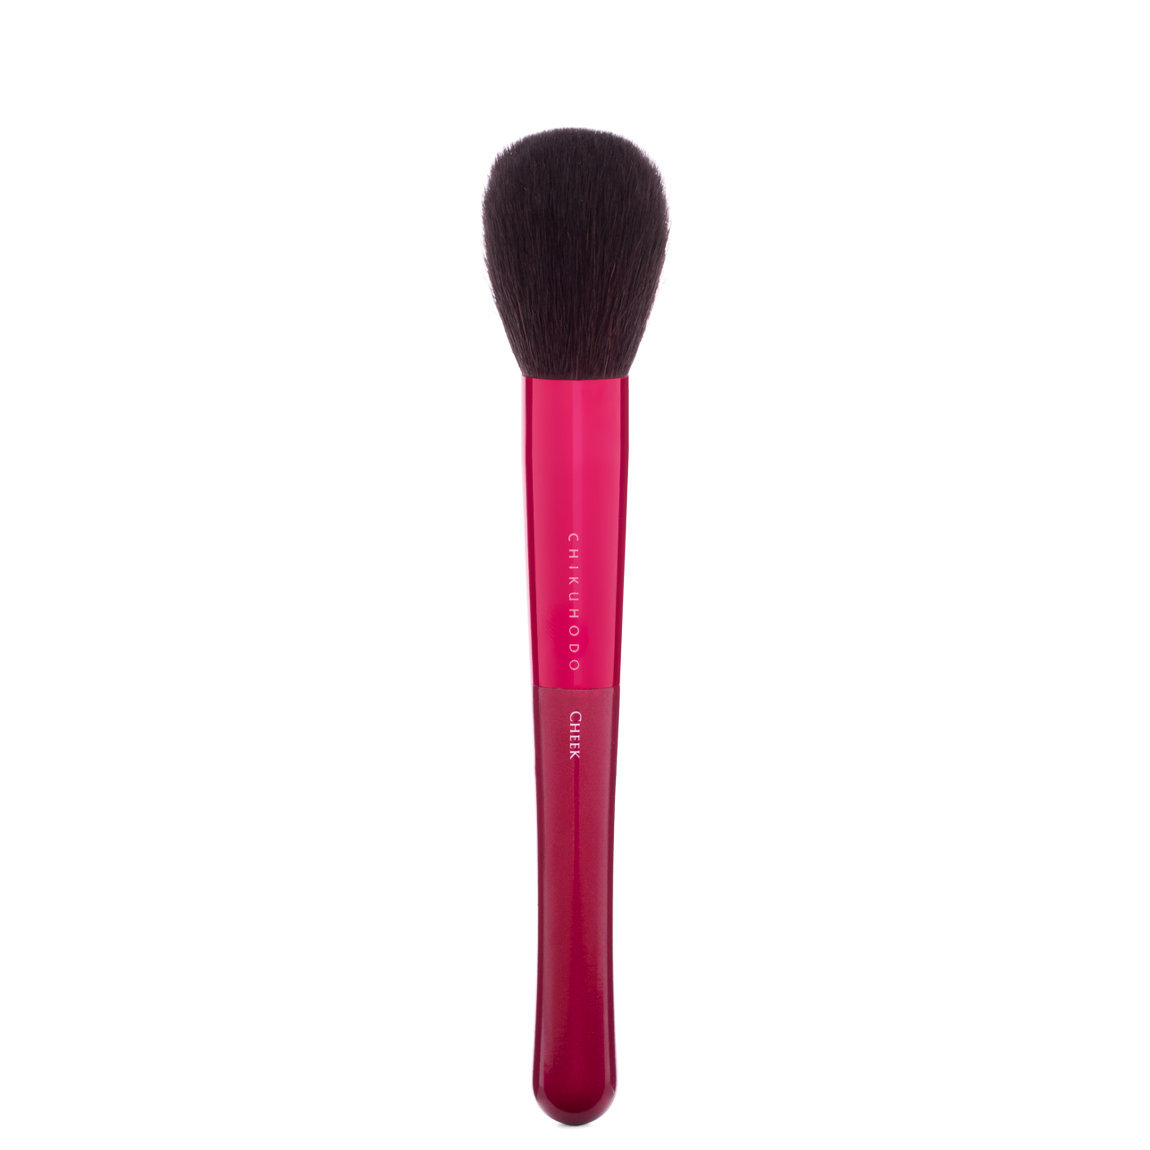 CHIKUHODO Passion Series PS-2 Cheek alternative view 1 - product swatch.